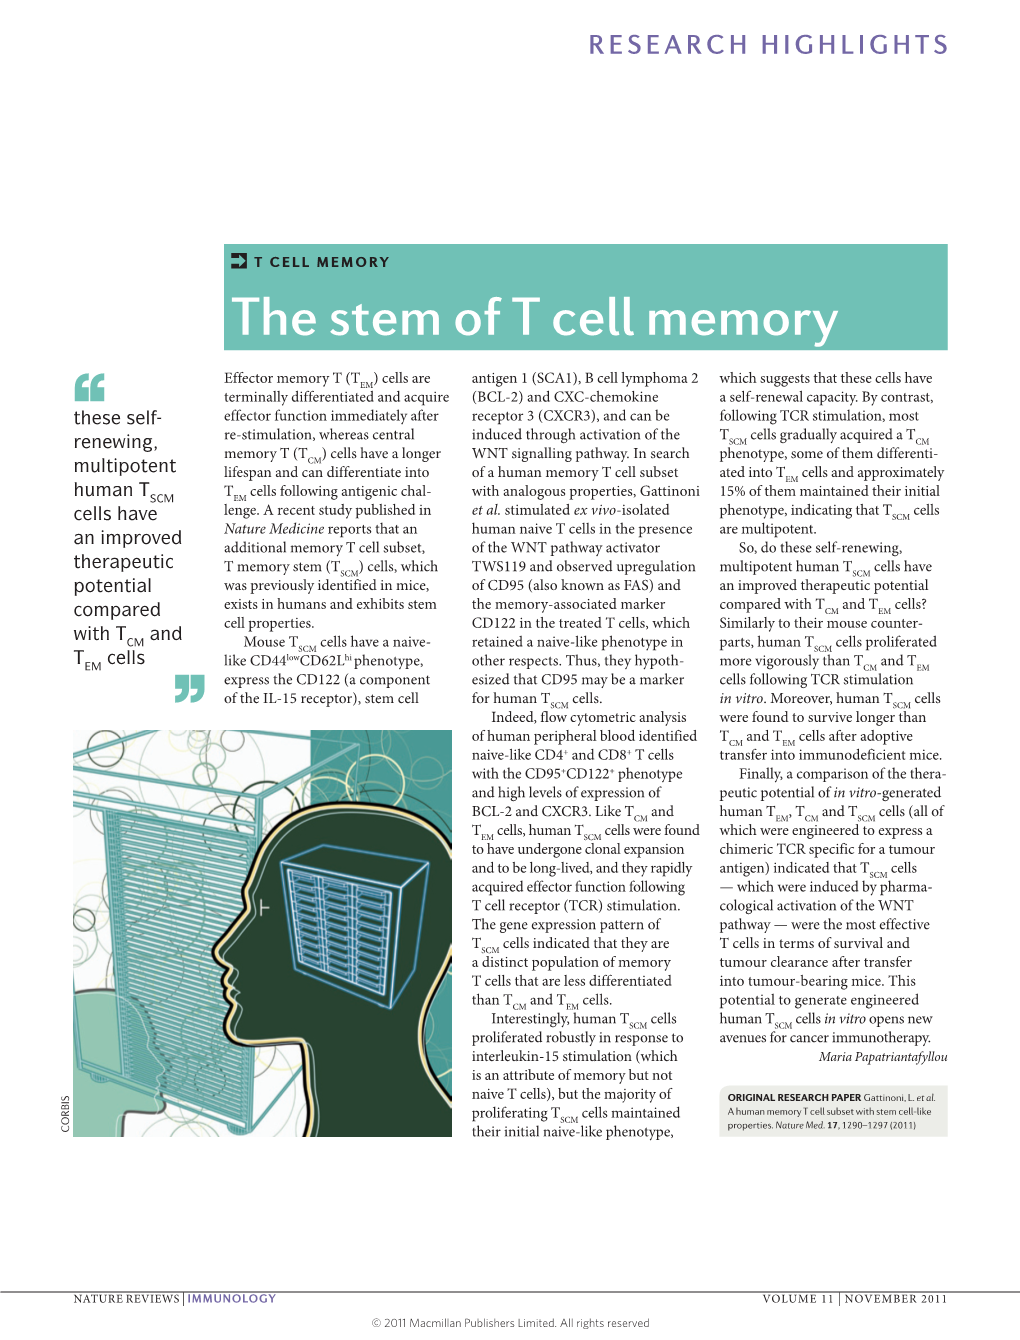 The Stem of T Cell Memory